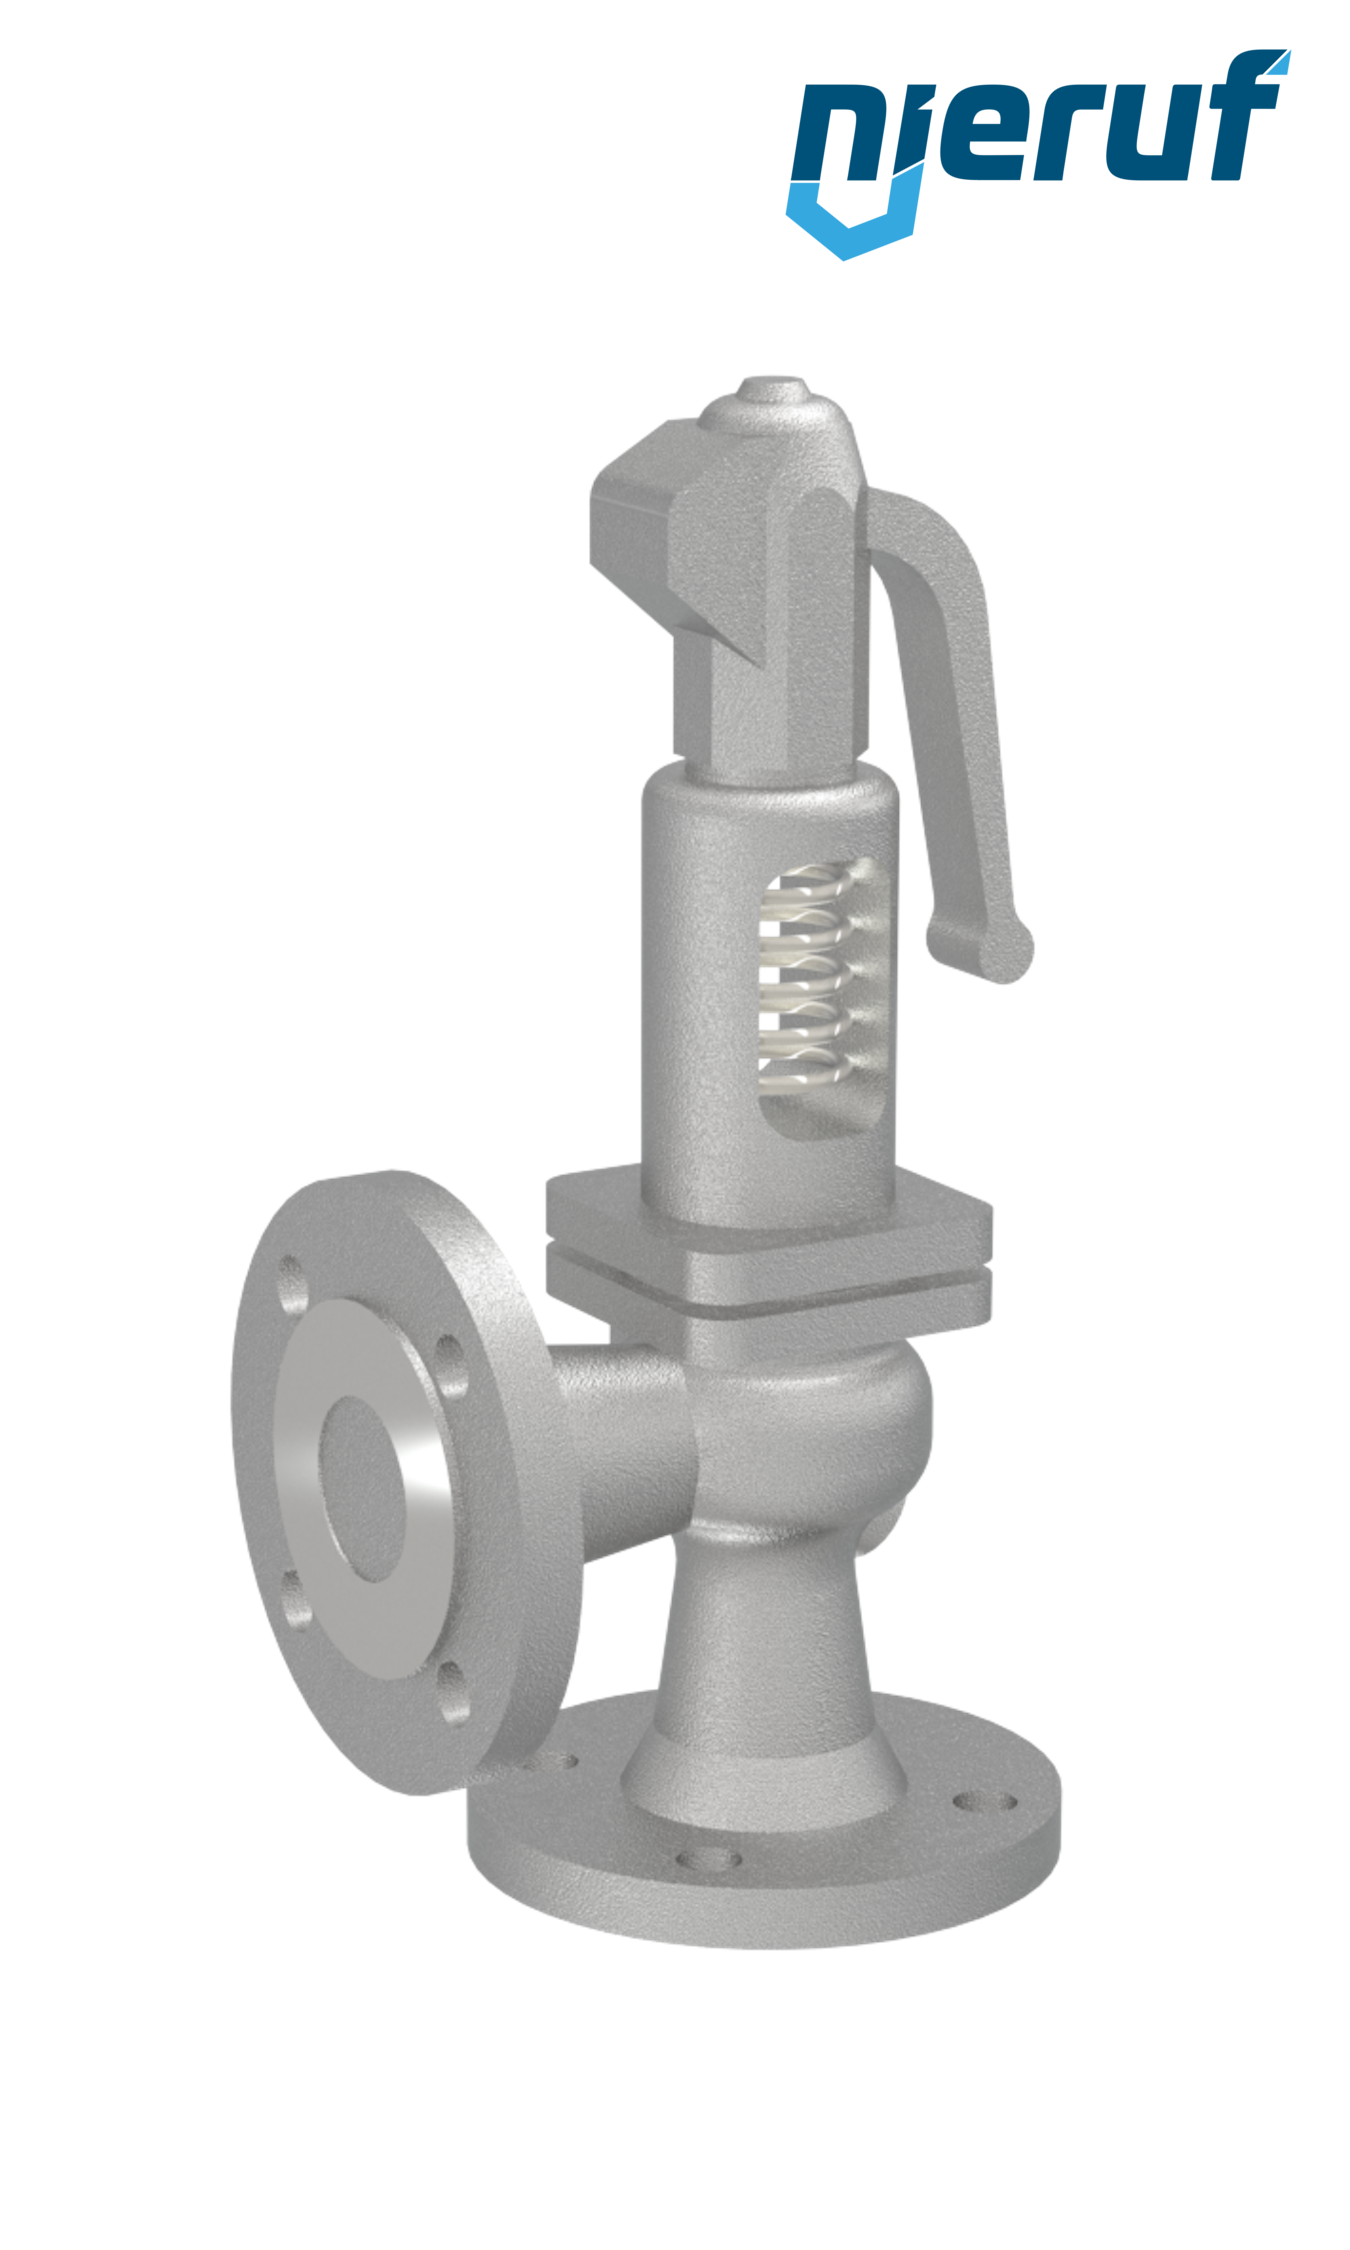 flange-safety valve DN15/DN15 SF0102, cast iron EN-JL1040 metal, with lever